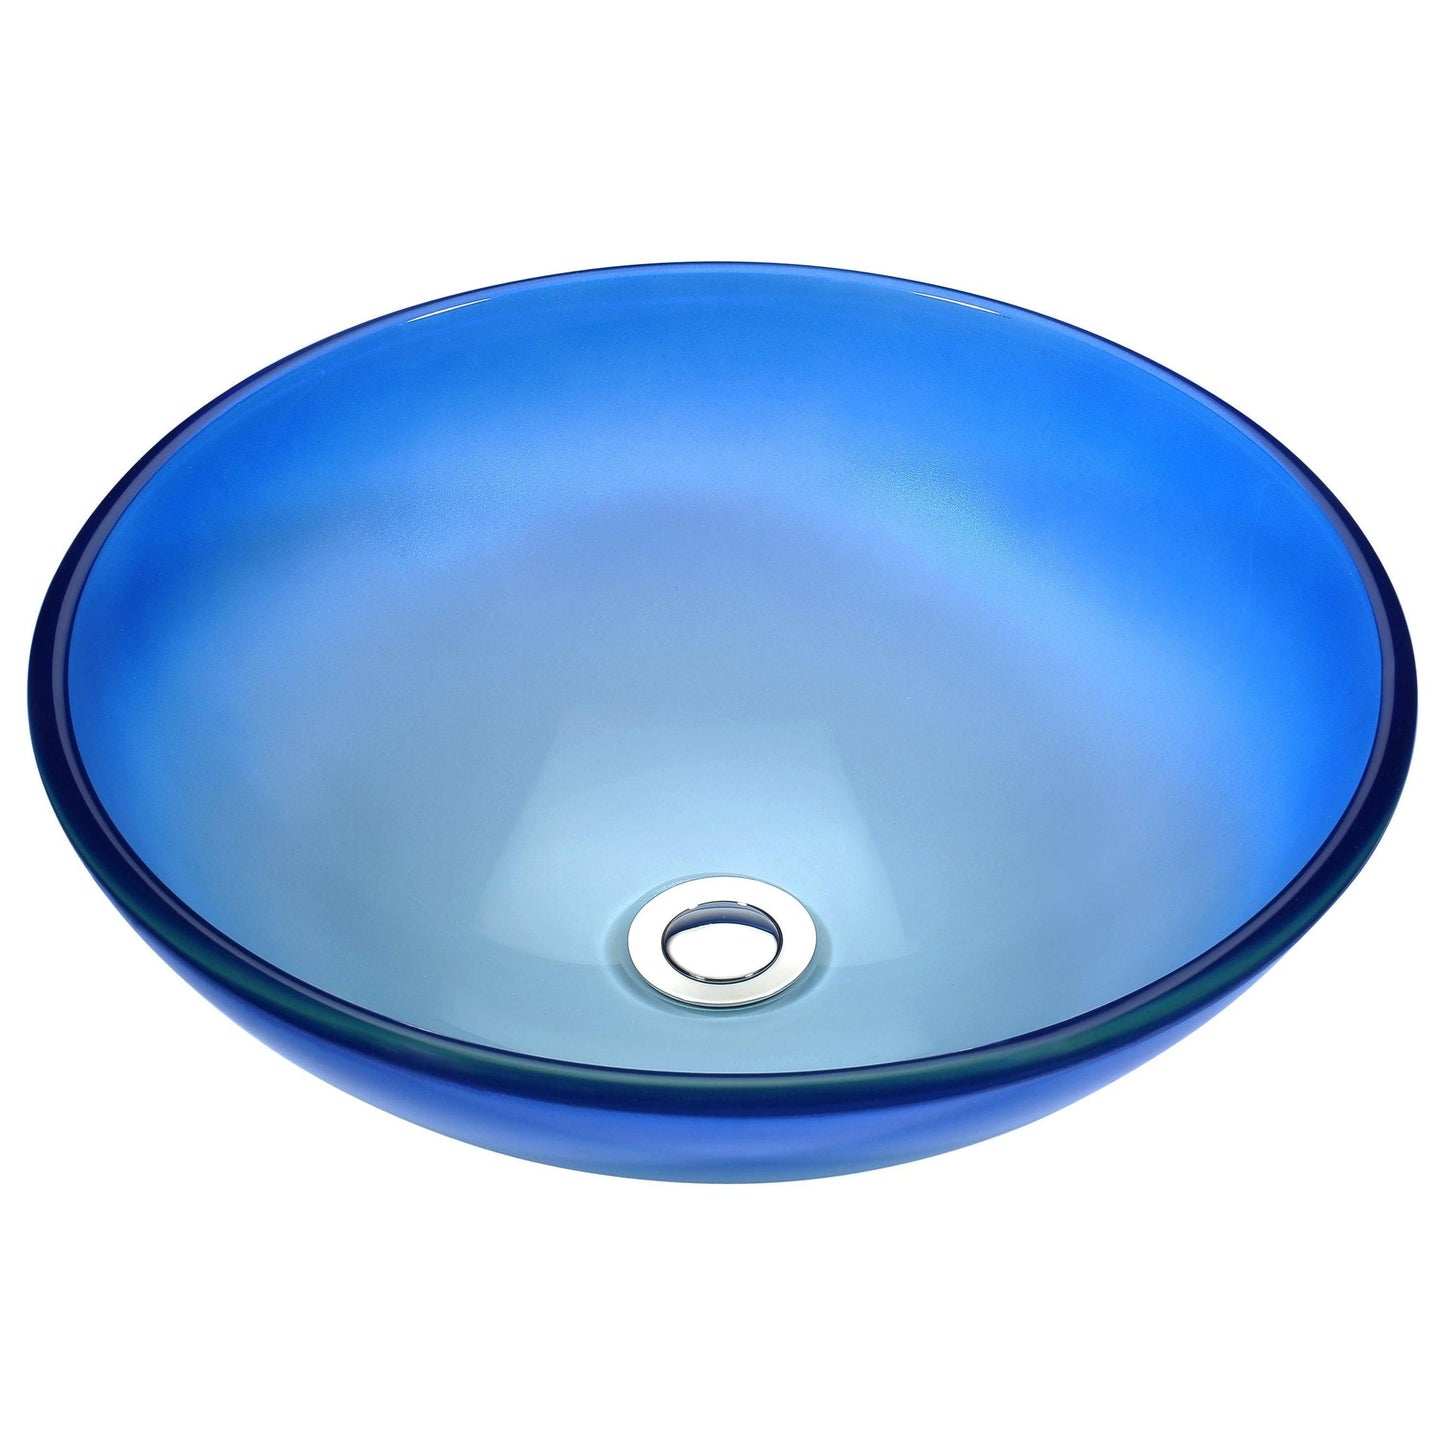 ANZZI Stellar Series 17" x 17" Round Carribean Shore Deco-Glass Vessel Sink With Polished Chrome Pop-Up Drain